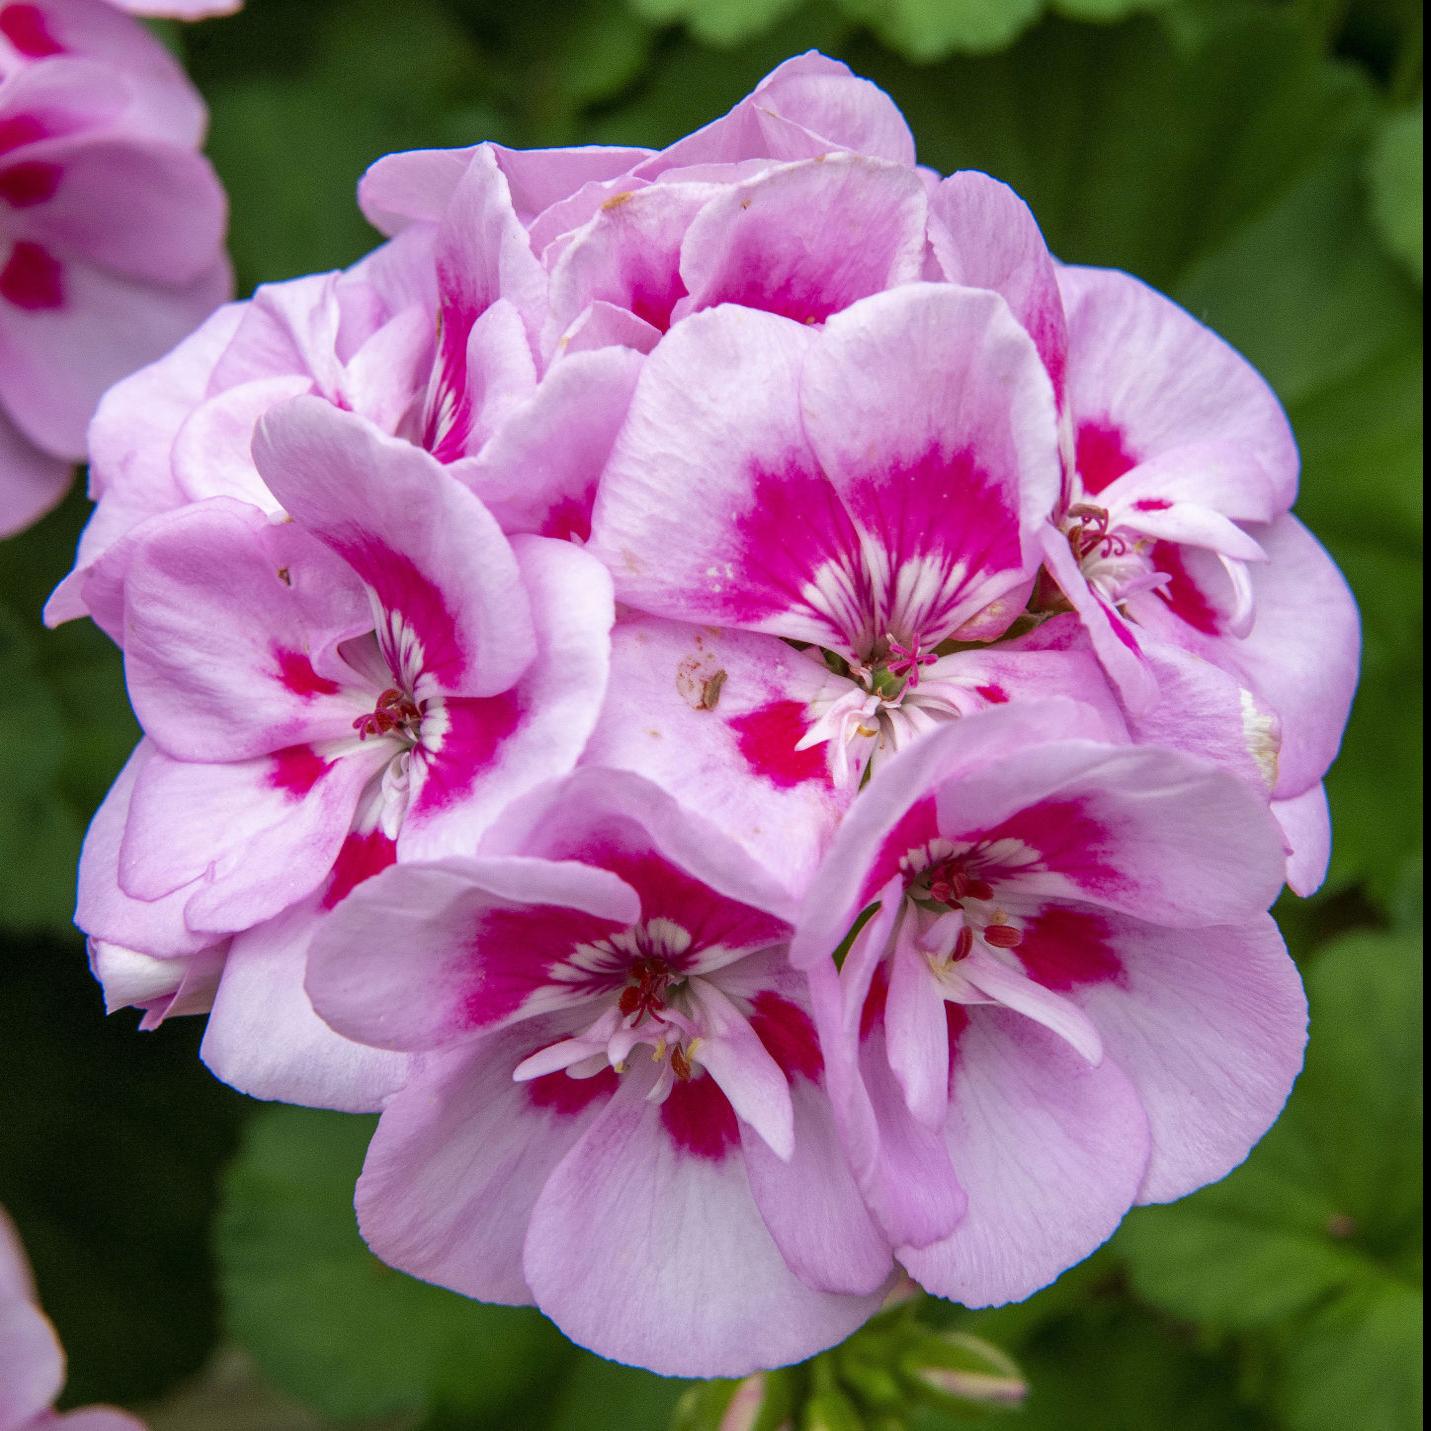 How to save geranium if the flower wilted